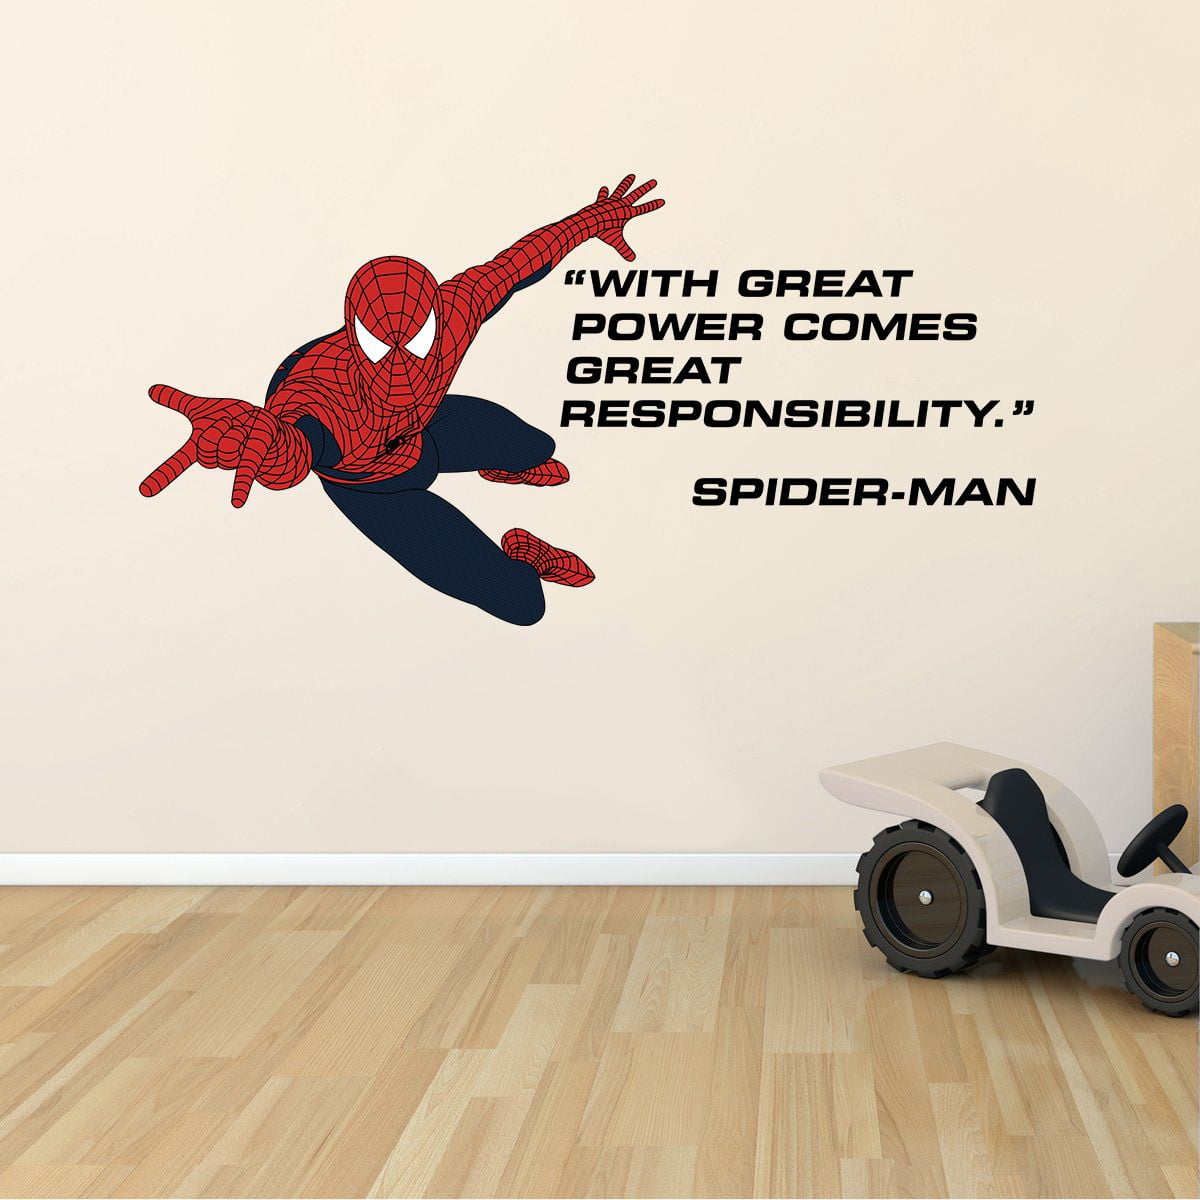 With Great Power Comes Great Responsibility 10 X 20 Vinyl Home Art Spider Man Decor Design 